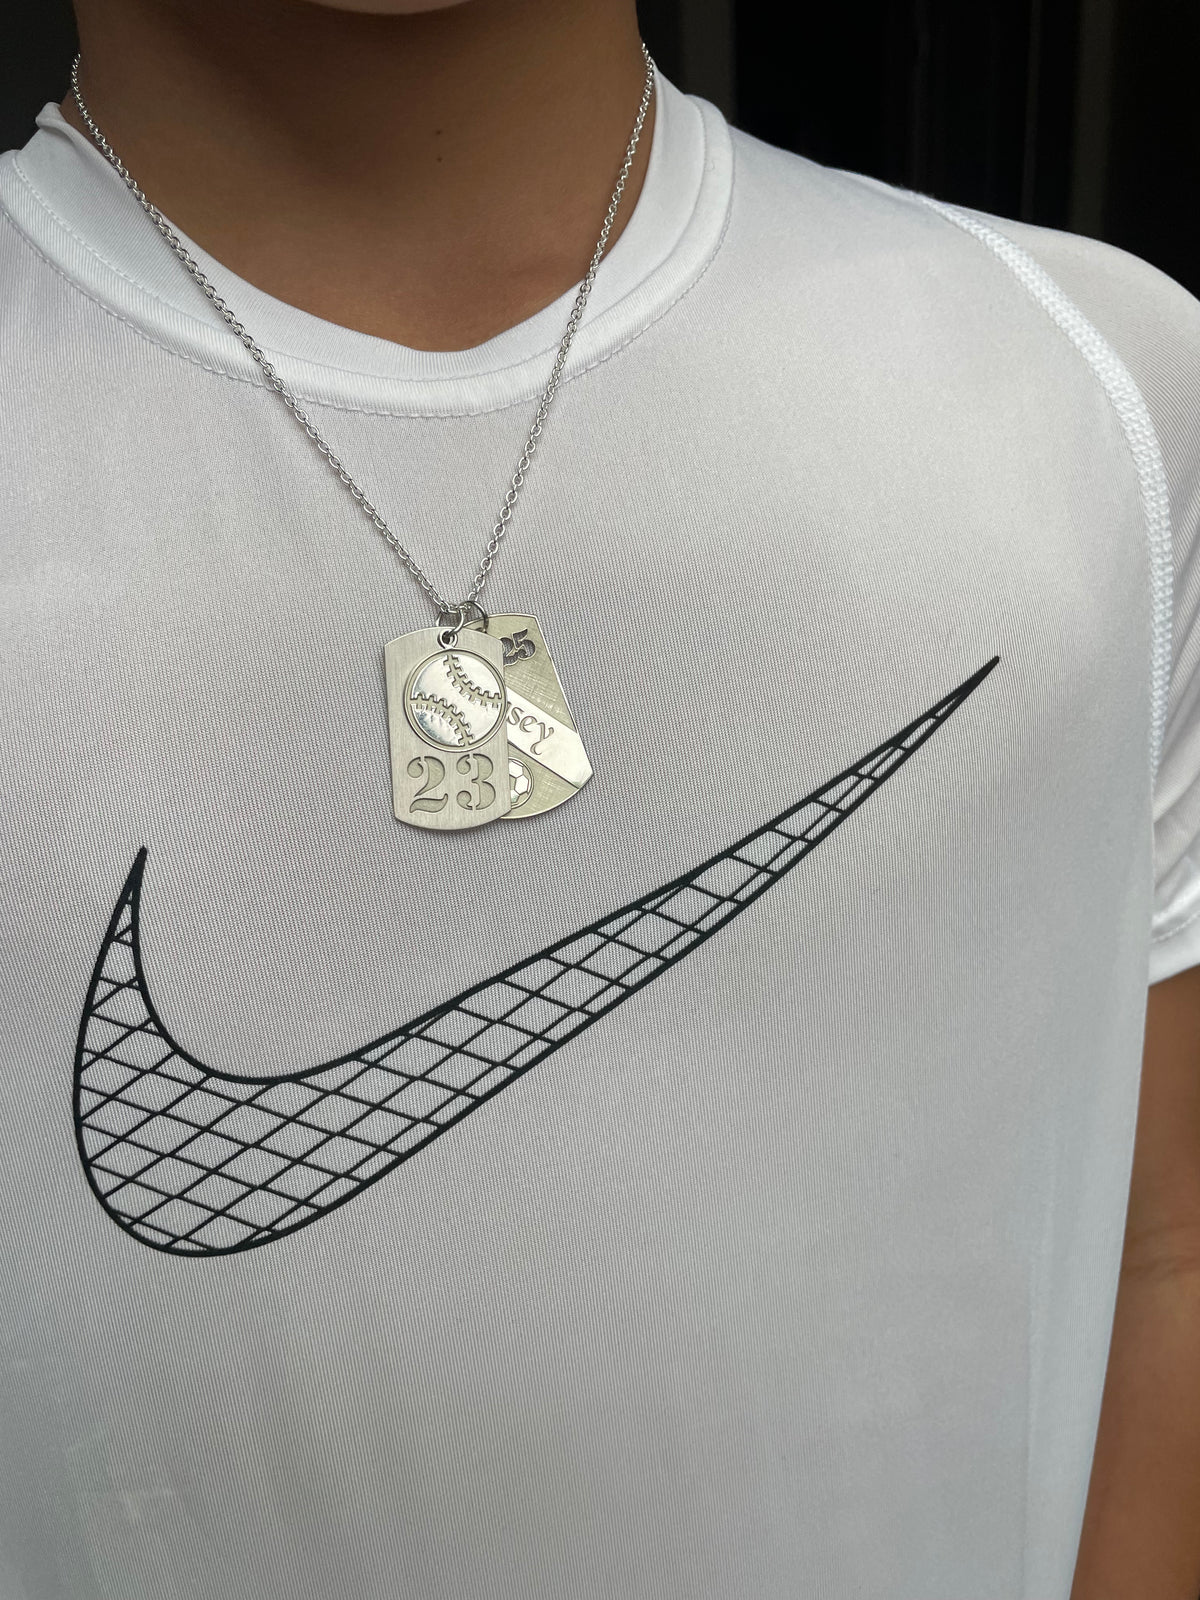 Jewelry, Nike Swoosh Necklace And Pendant Gold Or Silver